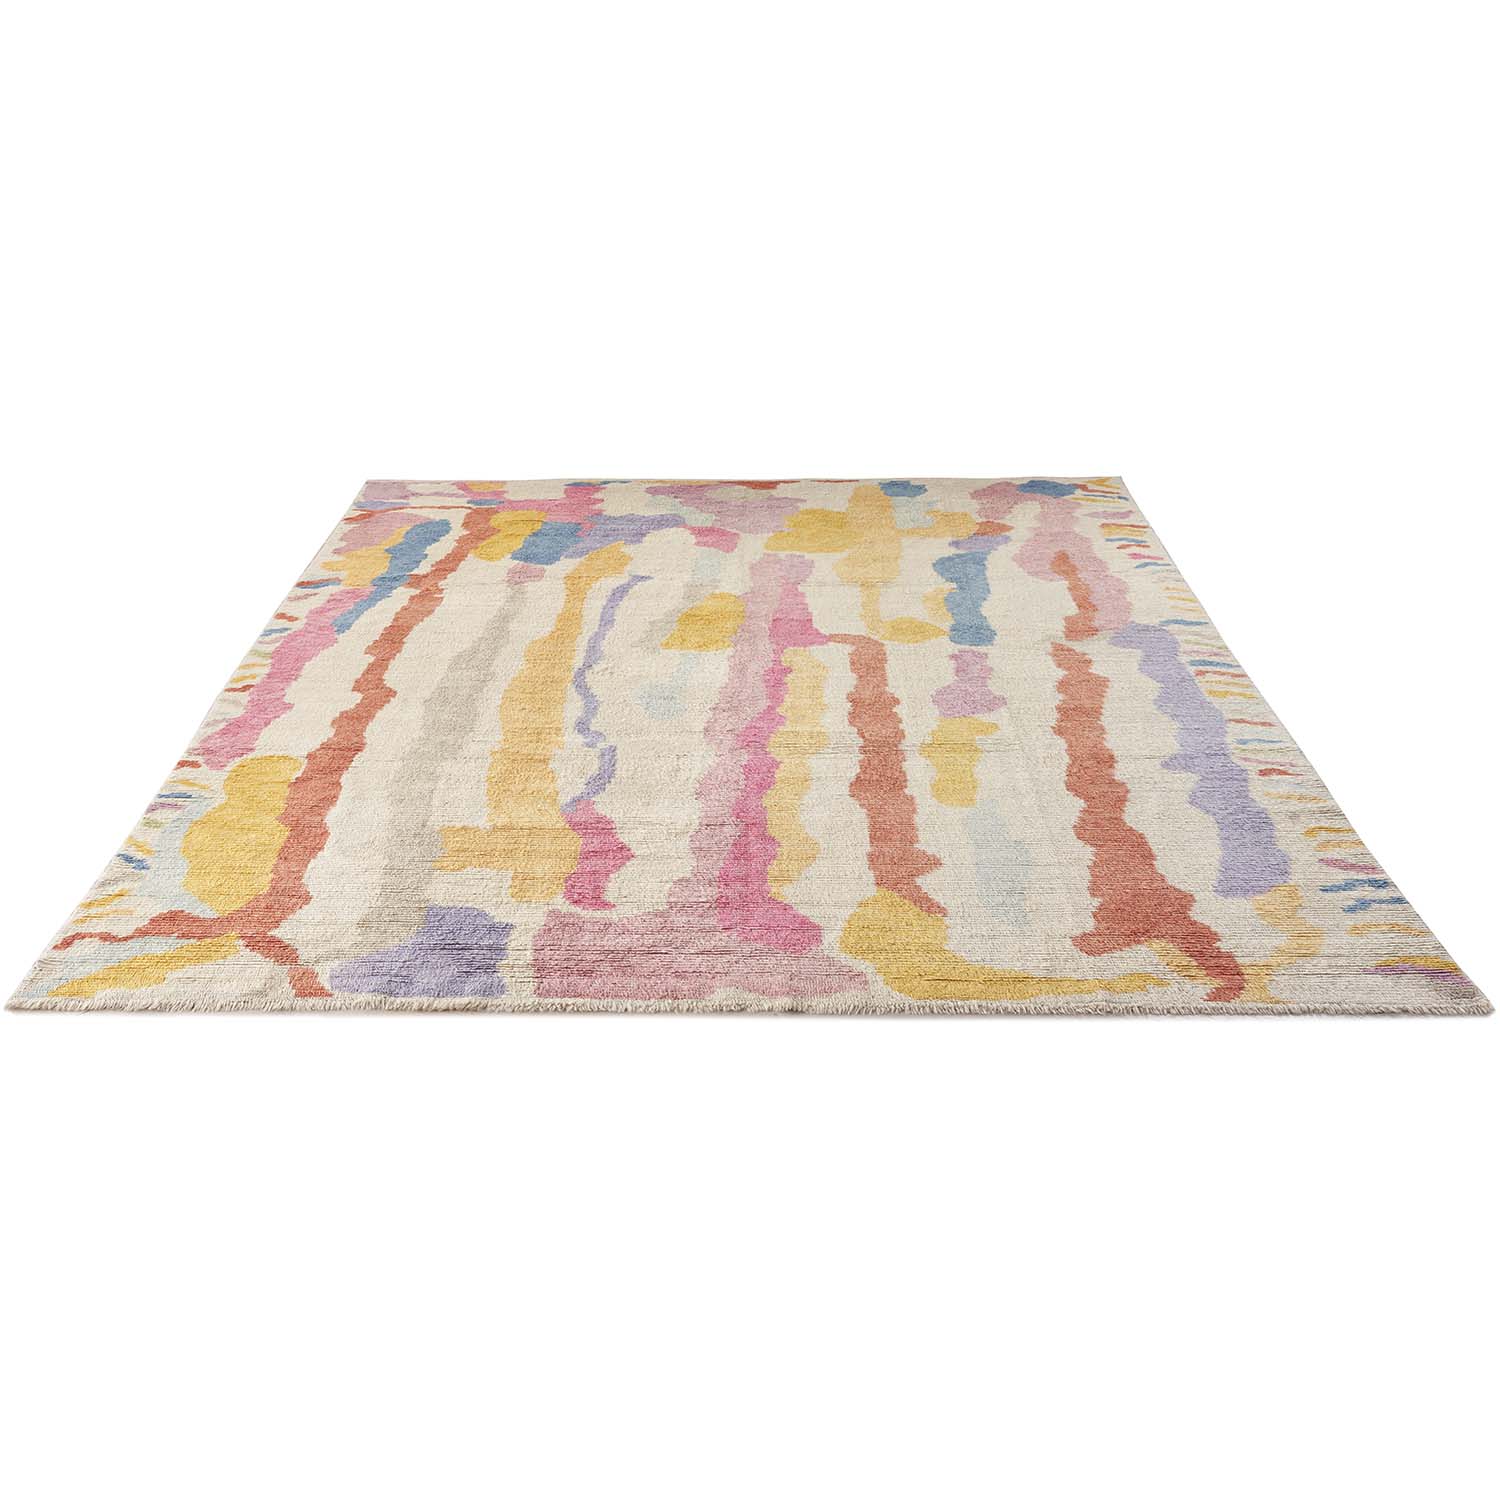 Colorful, abstract area rug with pastel stripes resembles watercolor painting.